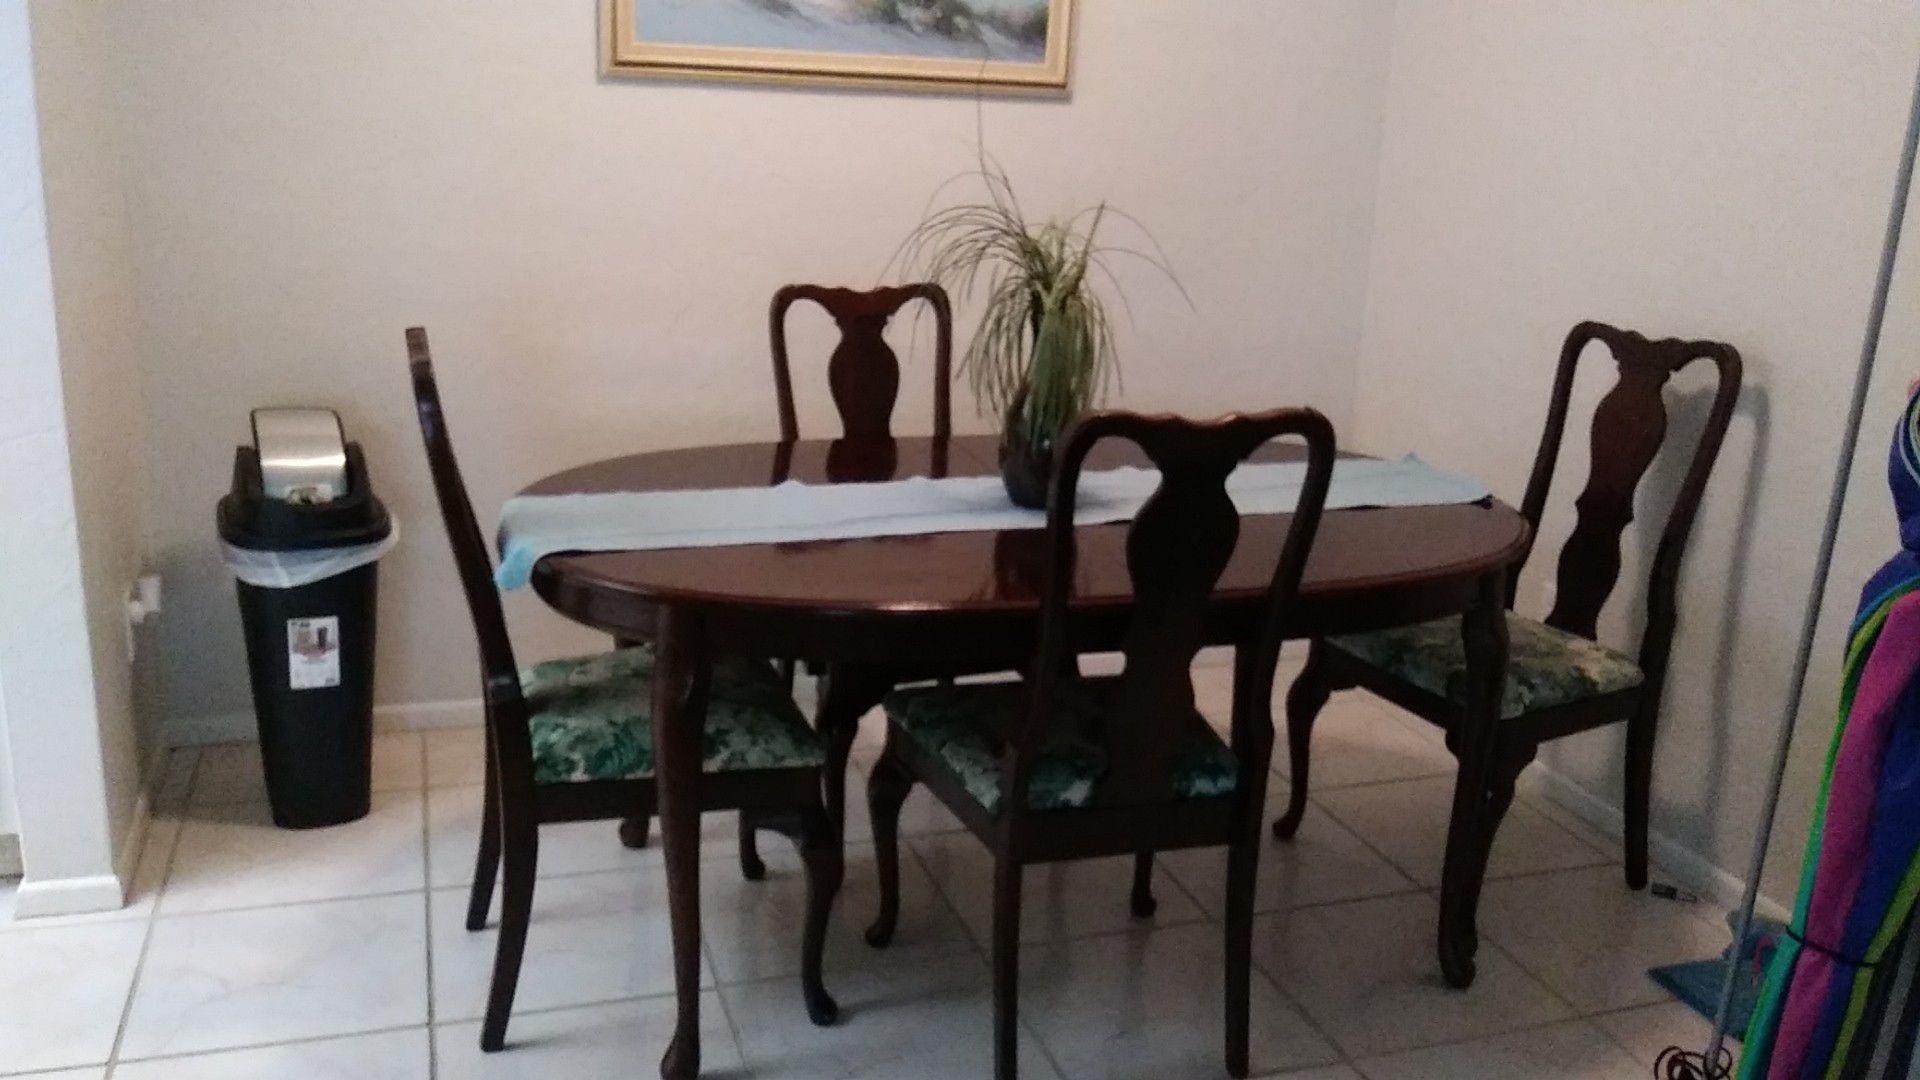 Antique Dining room table with 4 chairs